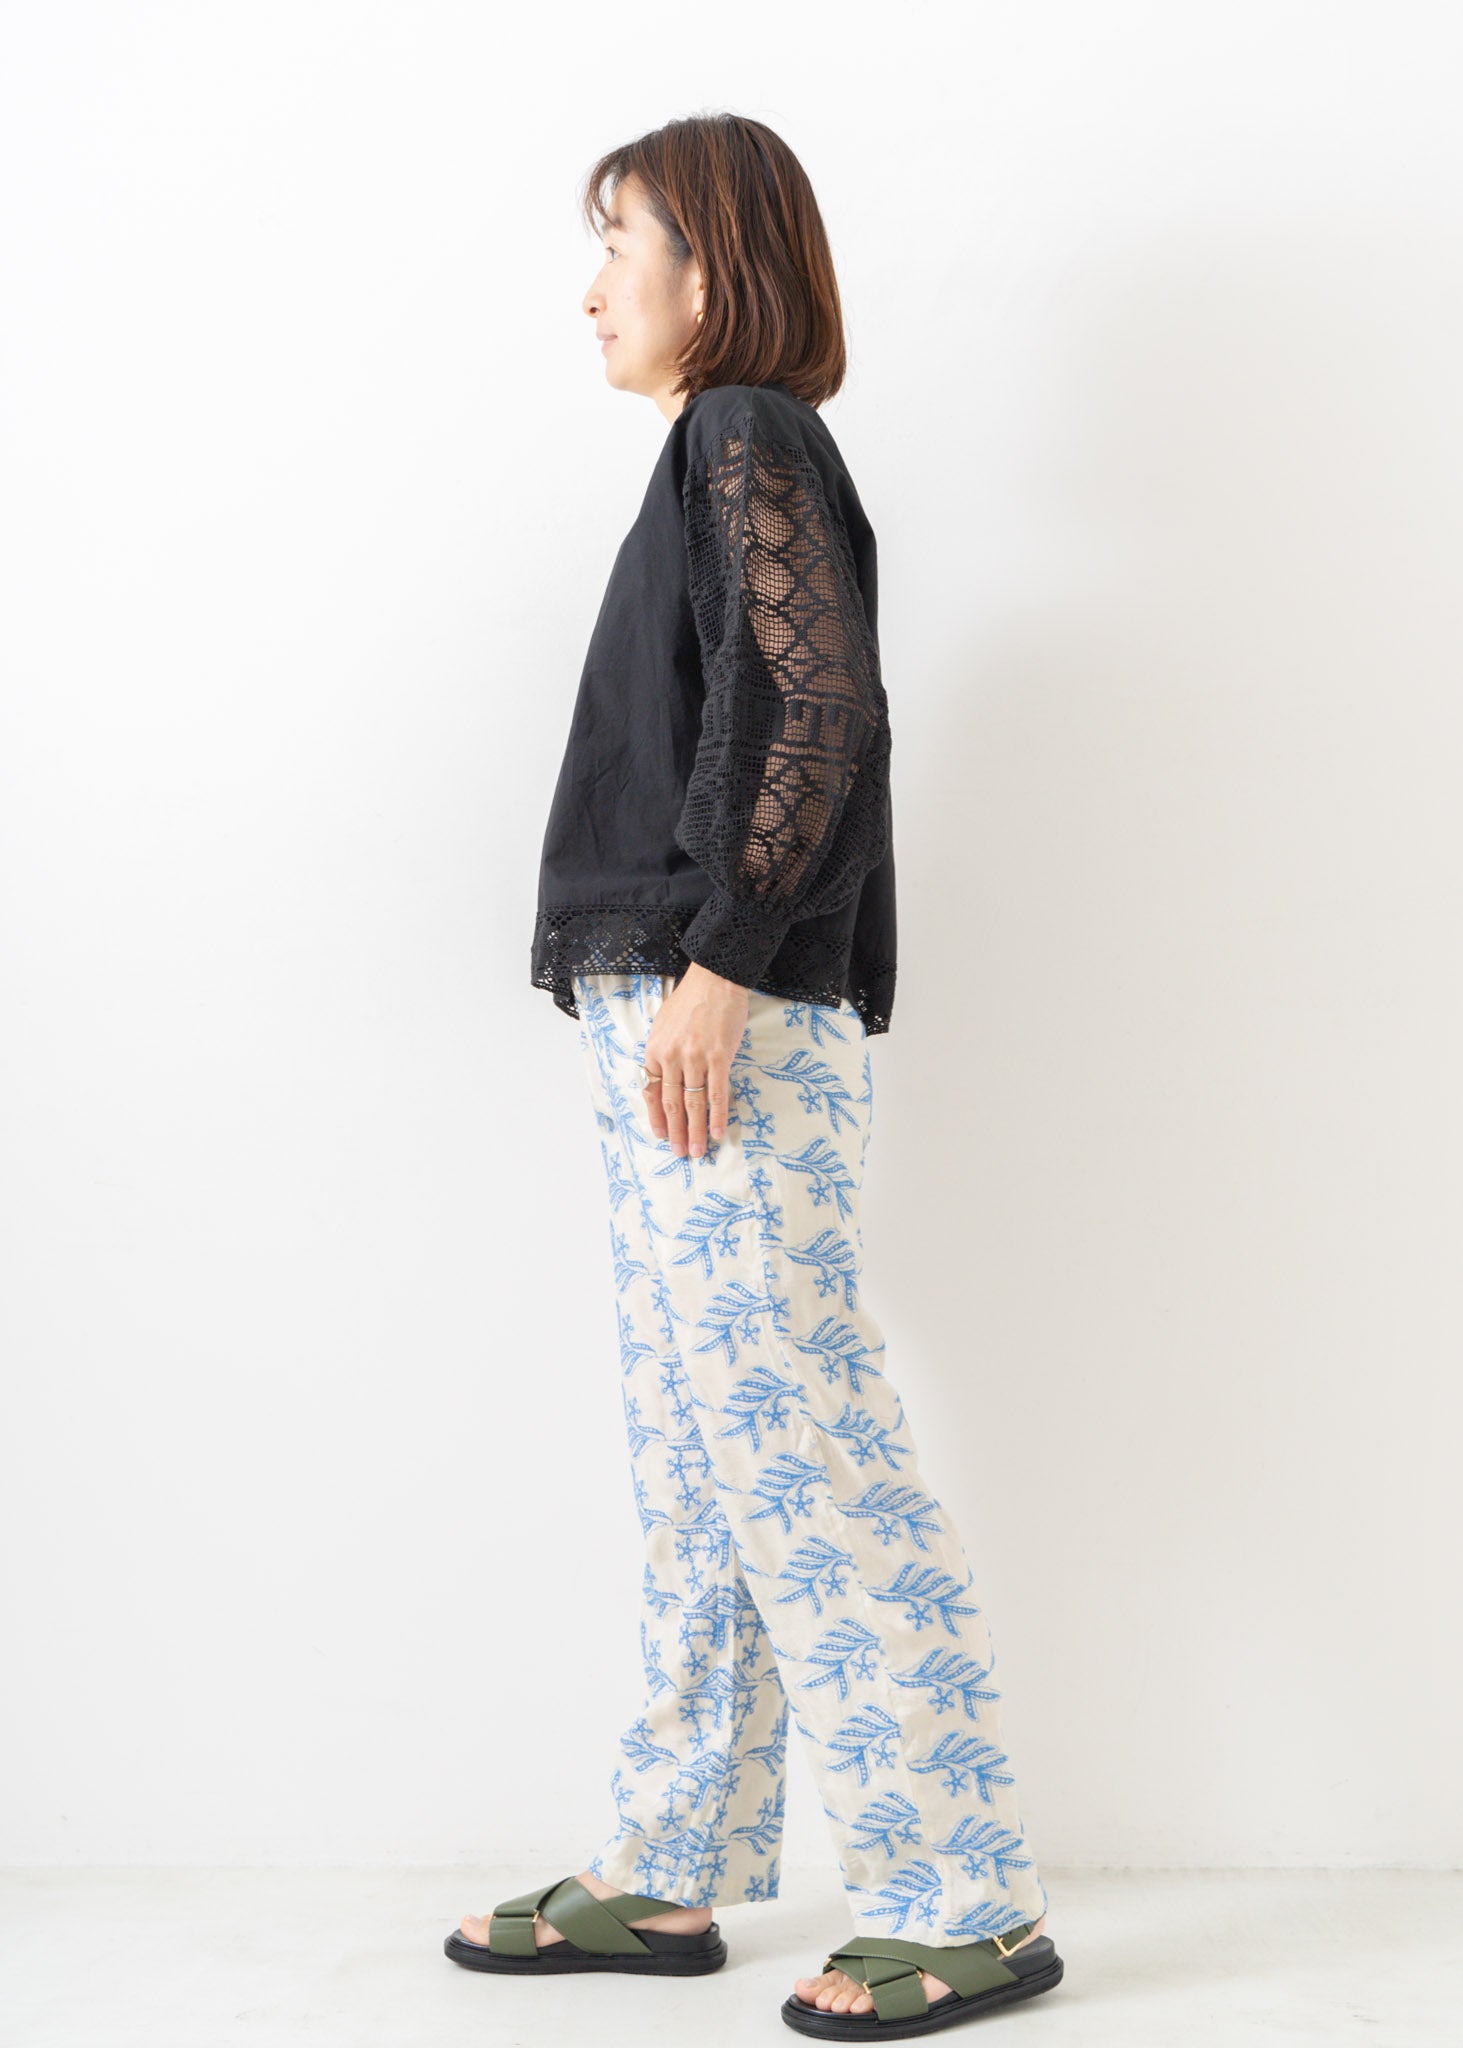 Geometric Lace Joint Top